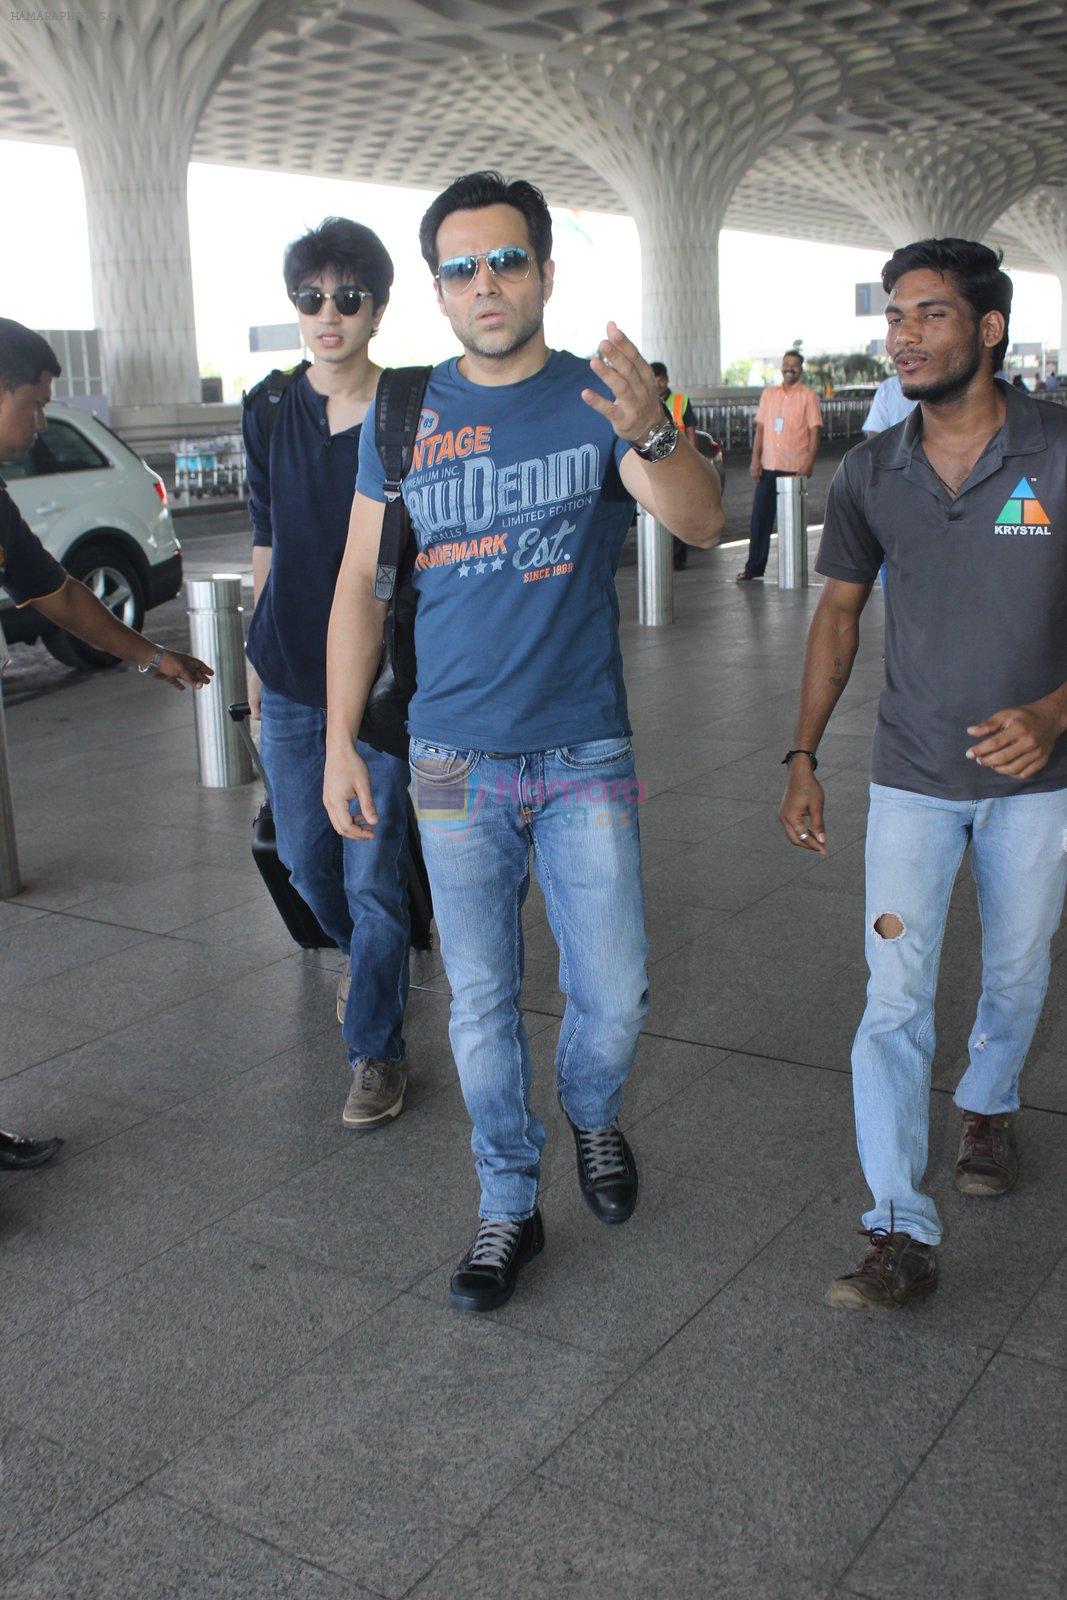 Emraan Hashmi snapped at airport on 20th March 2016